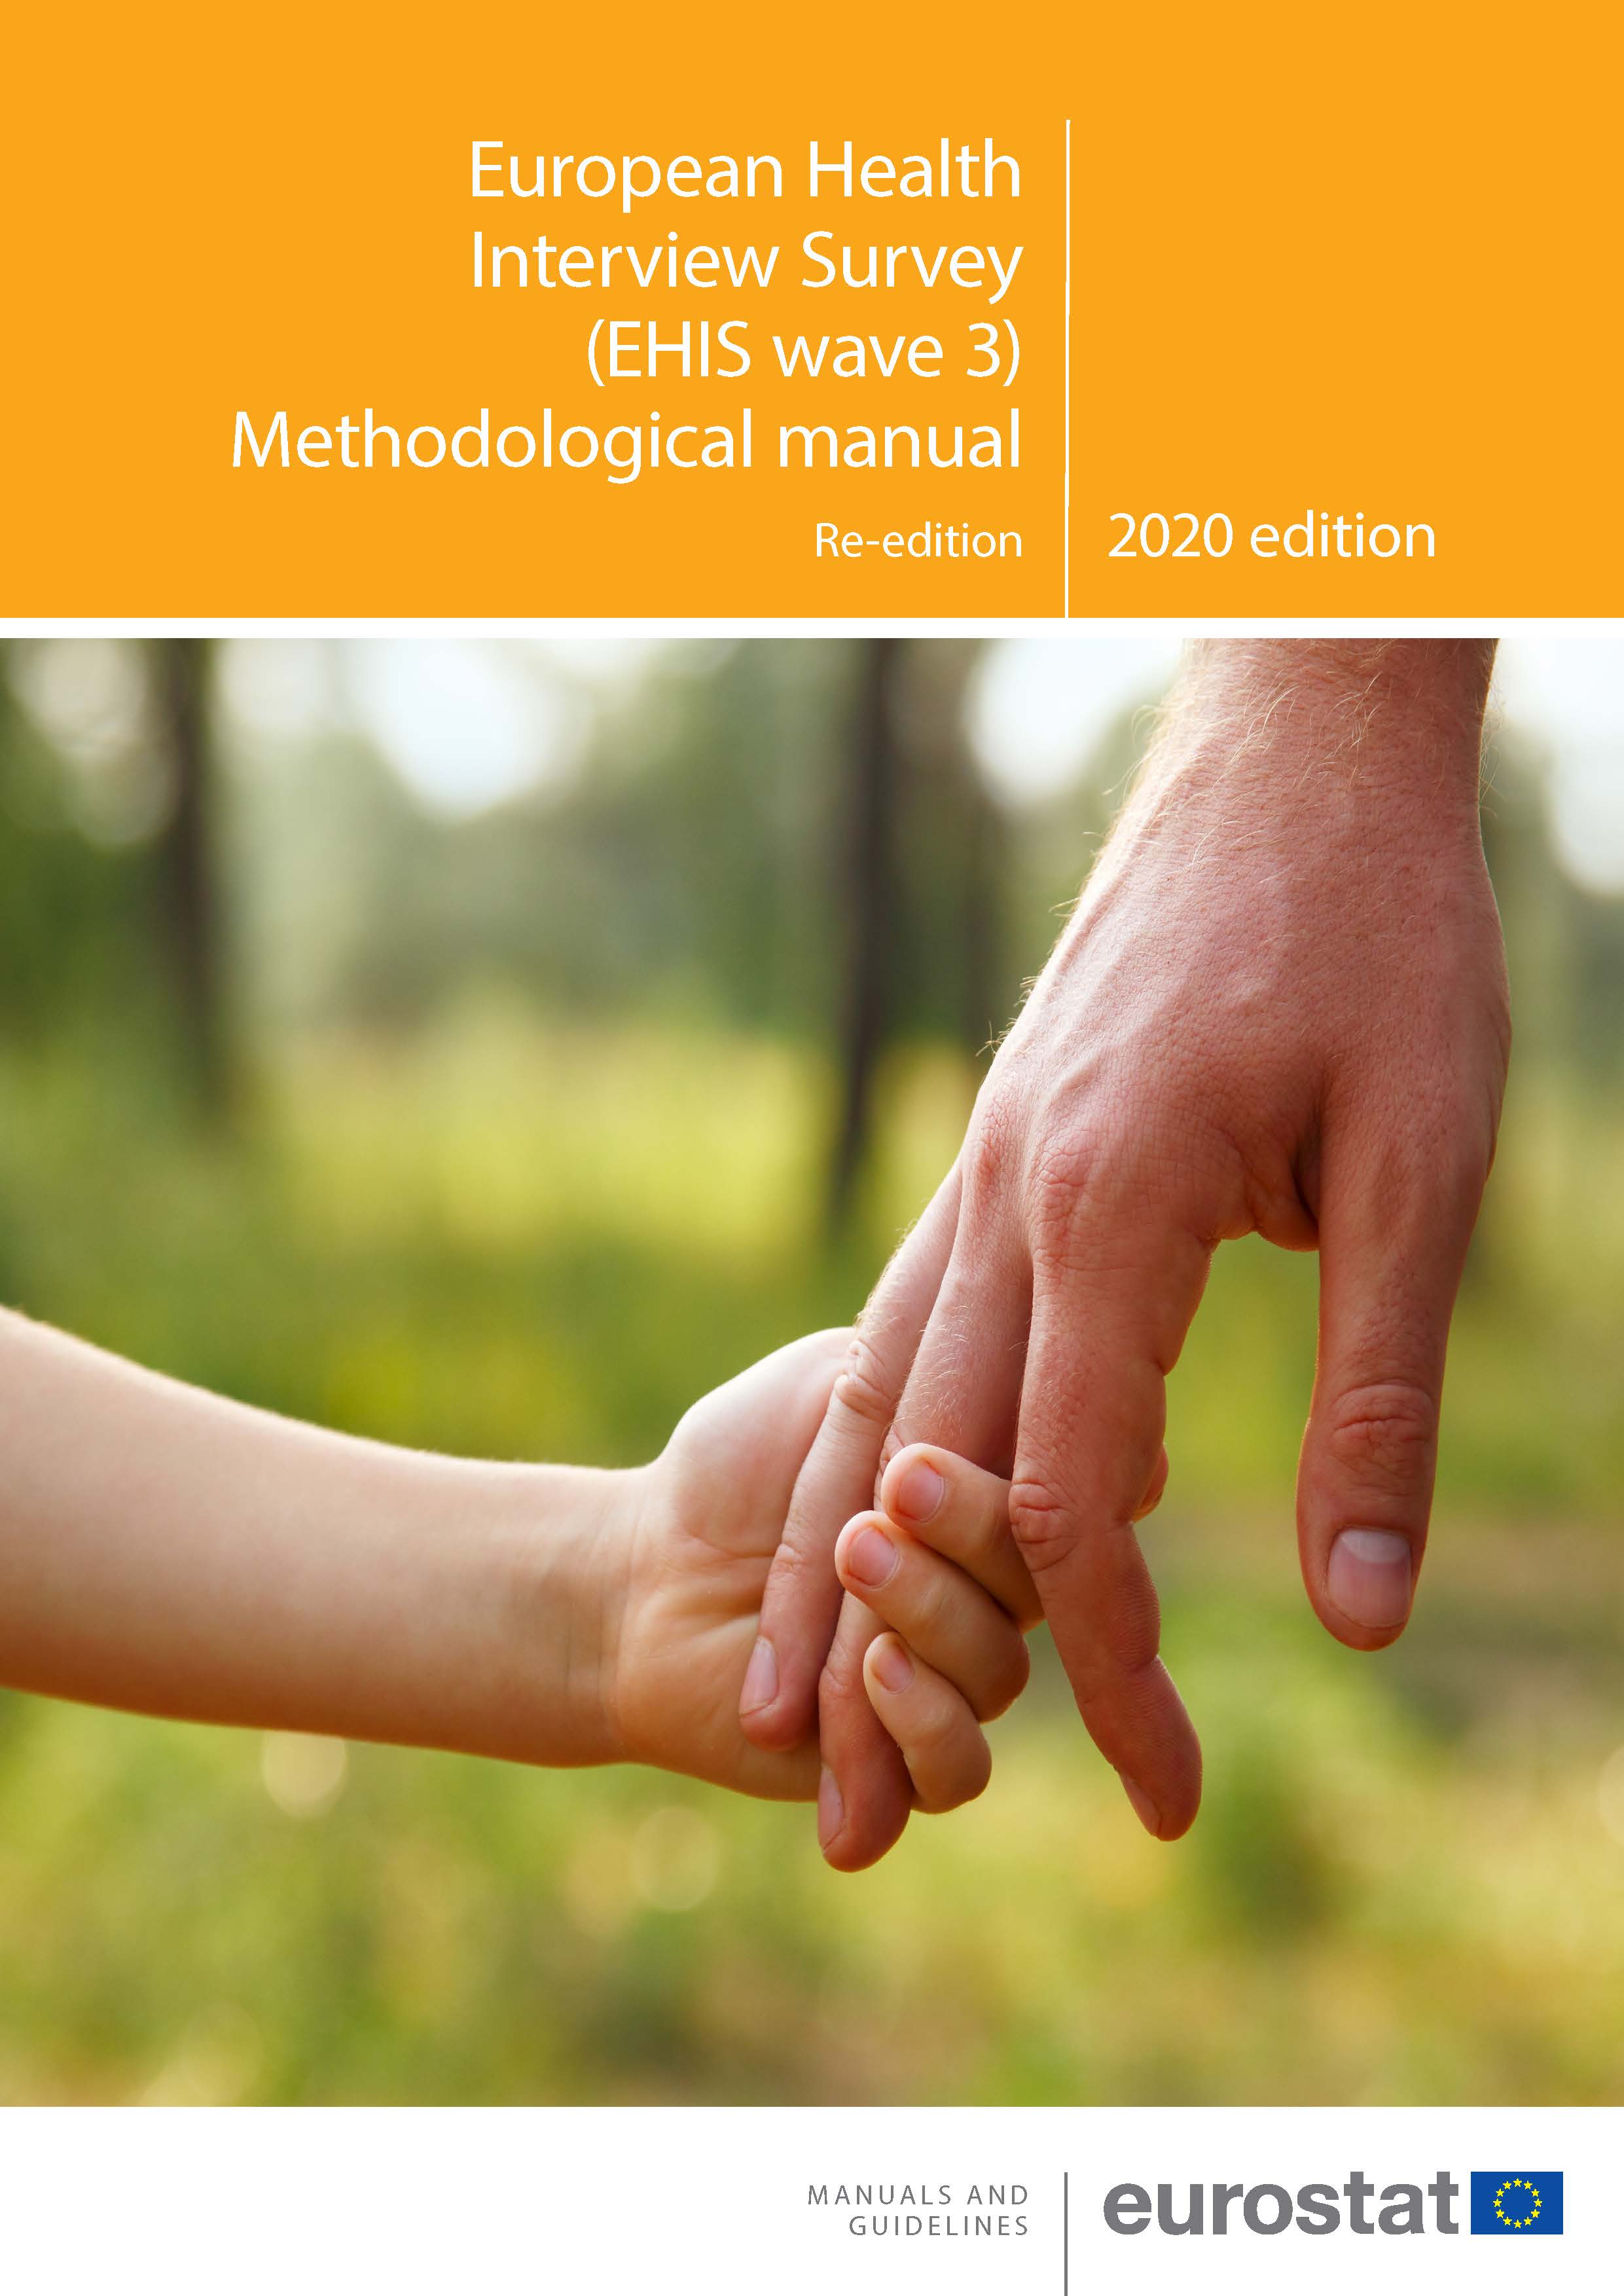 European Health Interview Survey (EHIS wave 3) — Methodological manual (re-edition 2020)